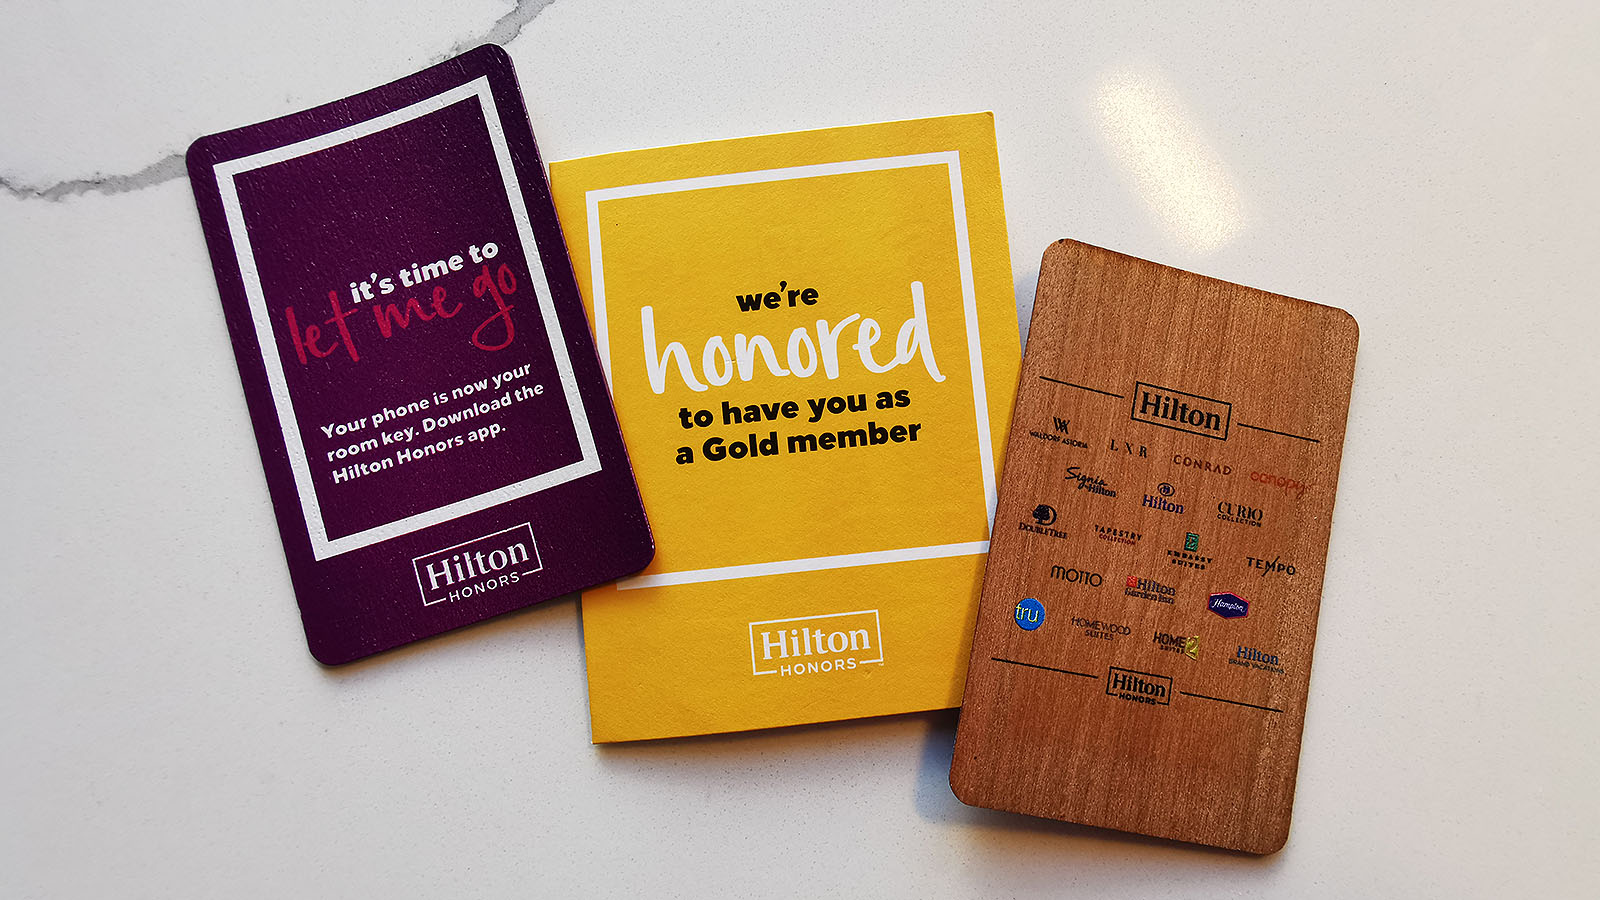 Wooden room keys at Hilton Singapore Orchard hotel